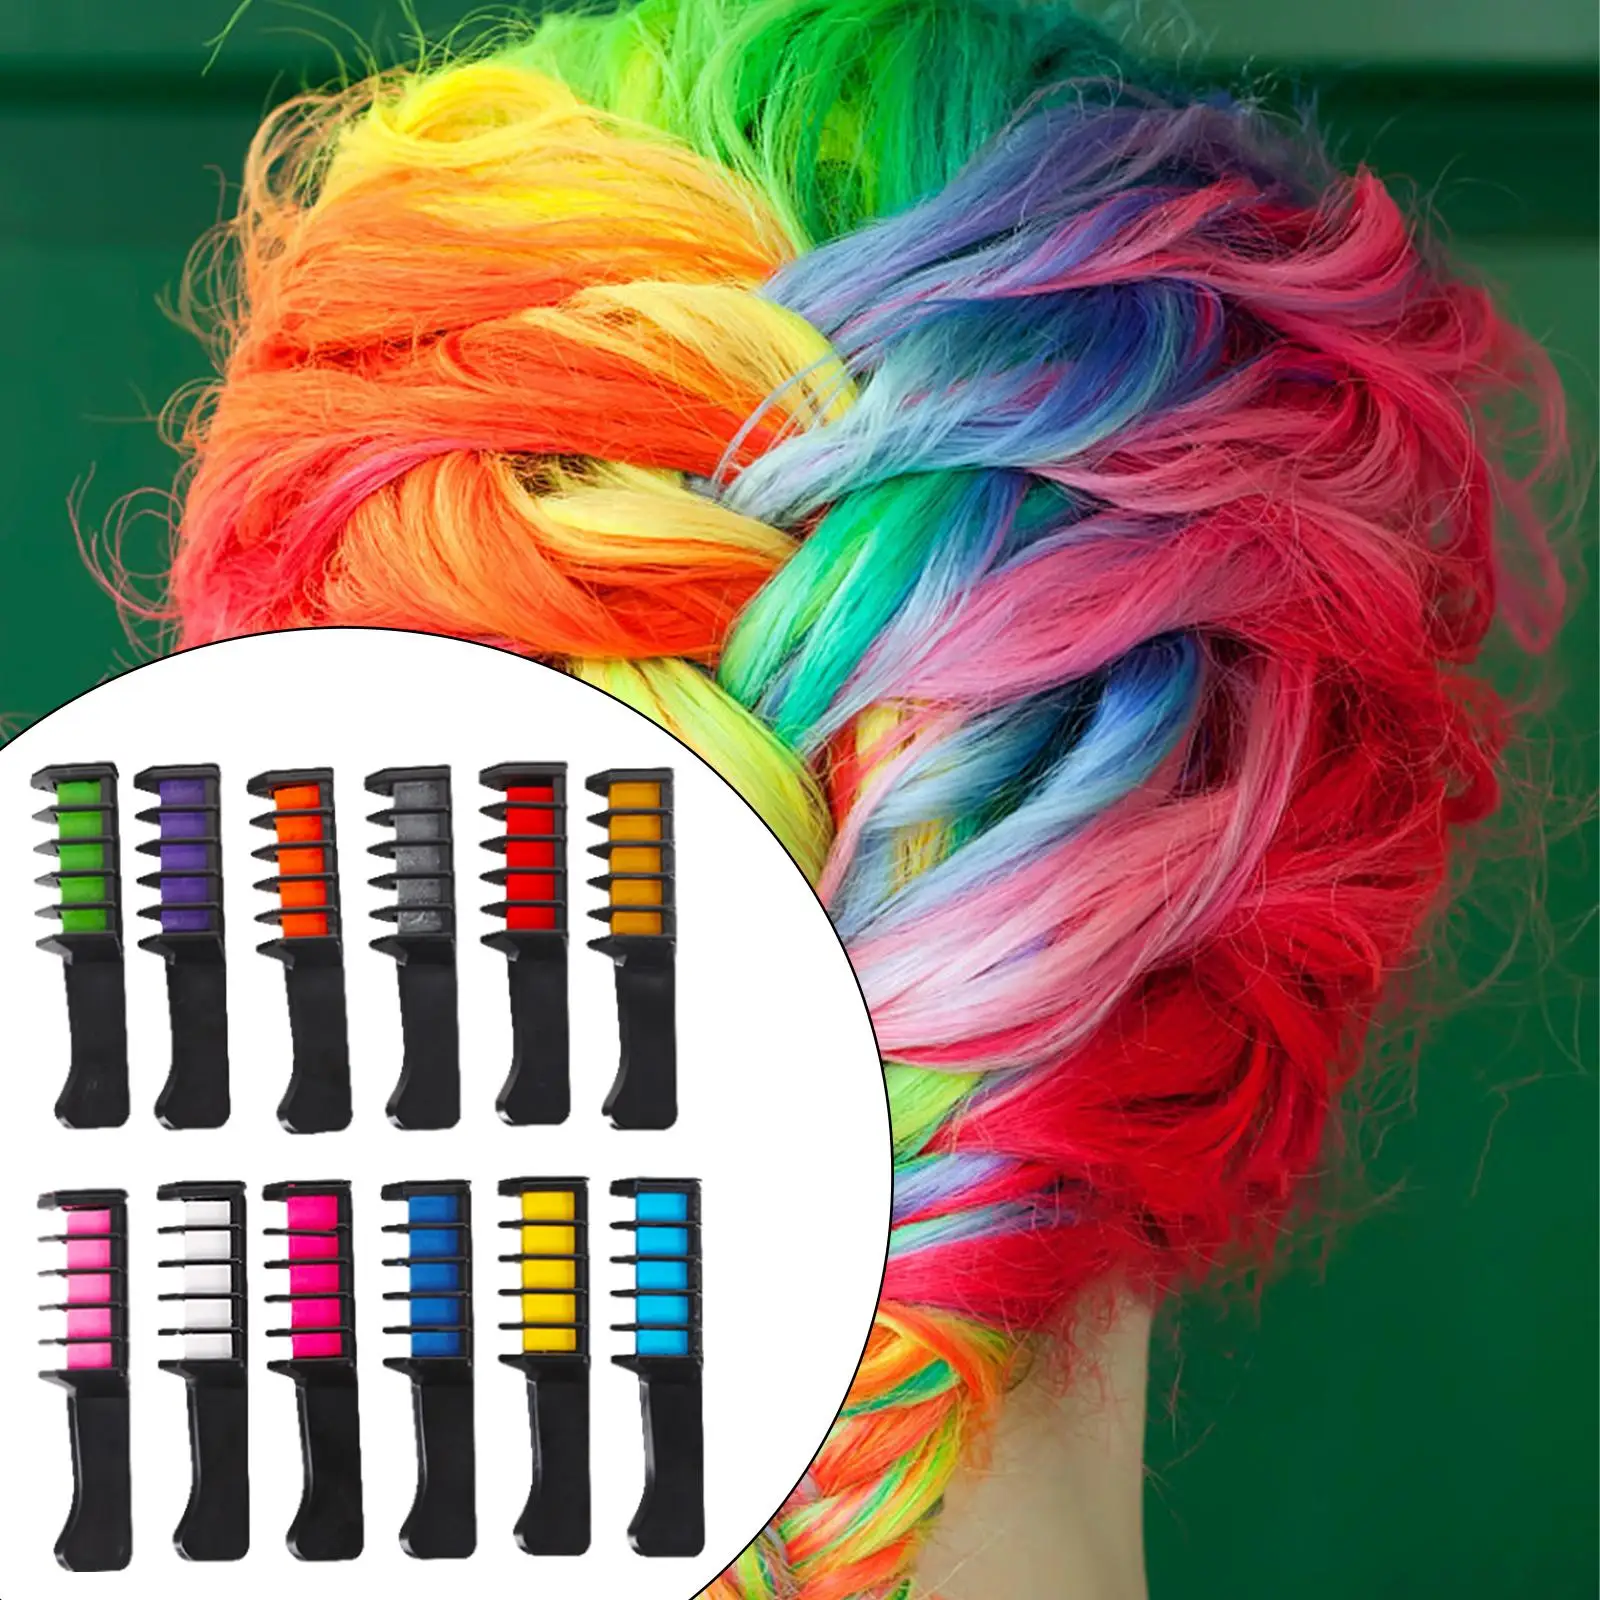 

12 Pieces Disposable Hair Dyeing Combs Easy to Clean DIY Washable Temporary Hair Chalk Comb for Cosplay Makeup Festivals Party